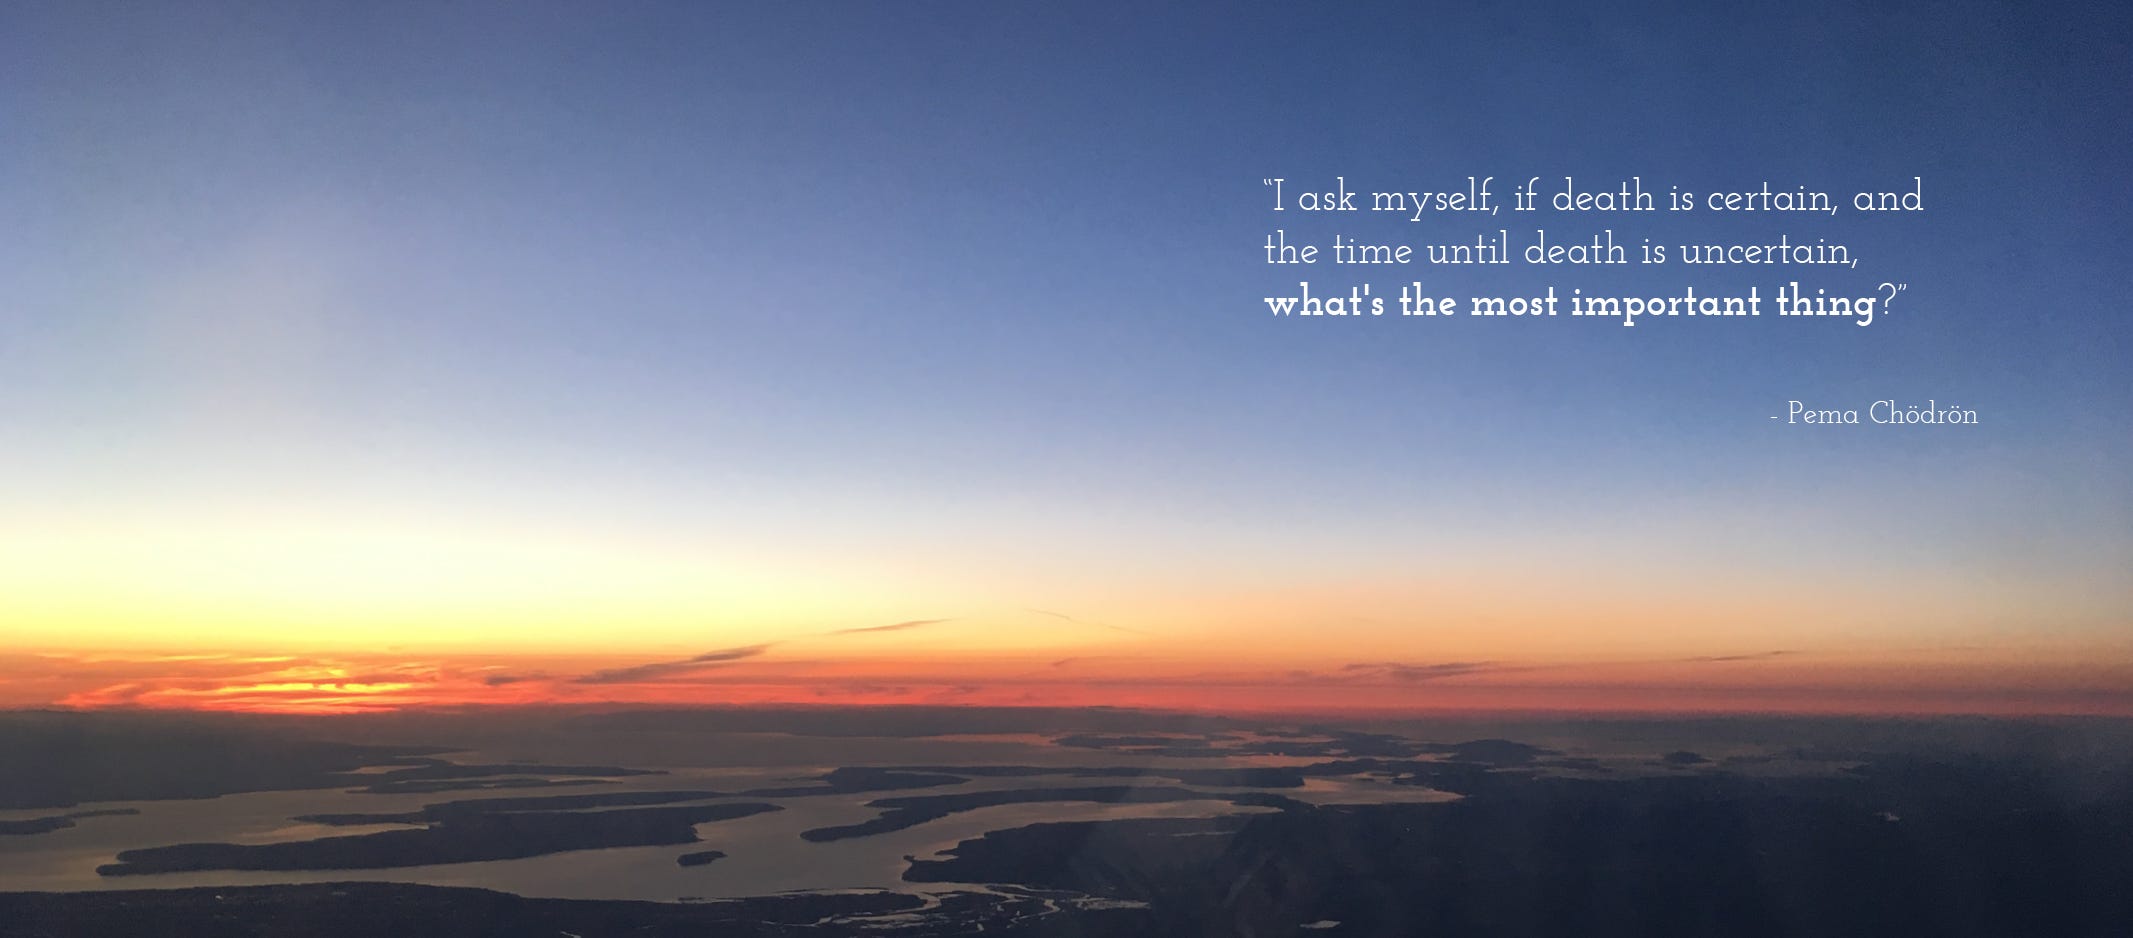 Image of a photo taken from an airplane during a sunset, mostly sky above with snaking waterways on the dark earth below, a bright orange glow on the horizon. A quote by Pema Chödrön in the upper right-hand corner reads: “I ask myself, if death is certain, and the time until death is uncertain, what’s the most important thing?”